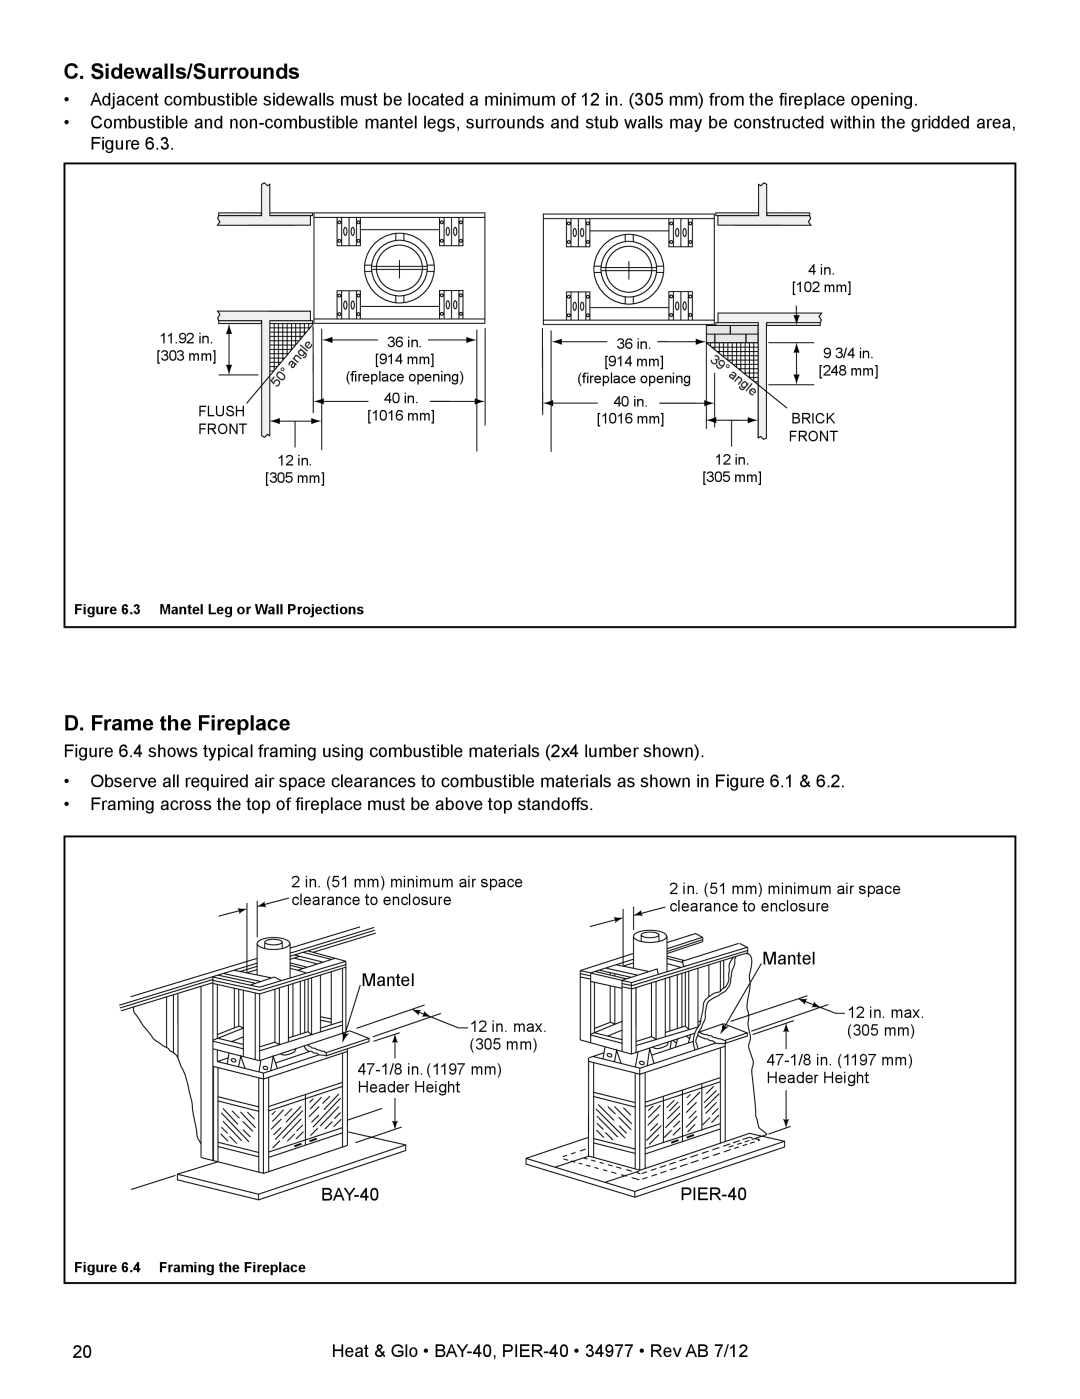 Heat & Glo LifeStyle owner manual D. Frame the Fireplace, Mantel, Heat & Glo BAY-40, PIER-40 34977 Rev AB 7/12 